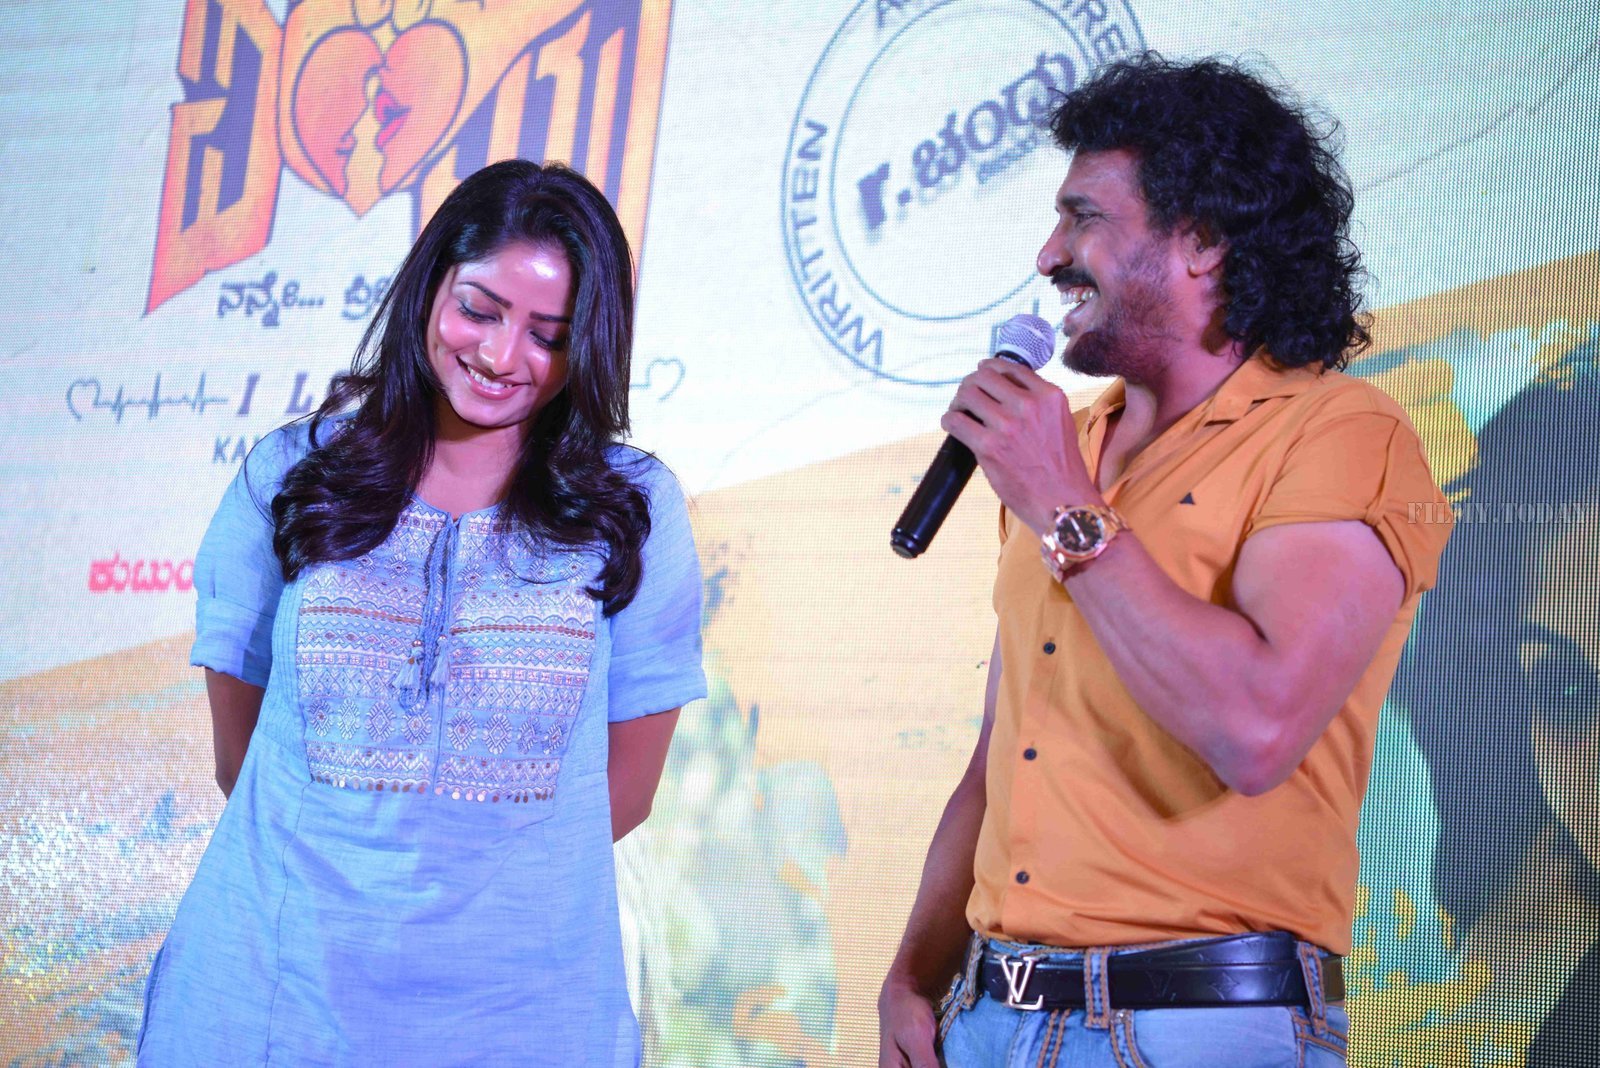 I Love You Kannada Film Trailer Release Photos | Picture 1650326